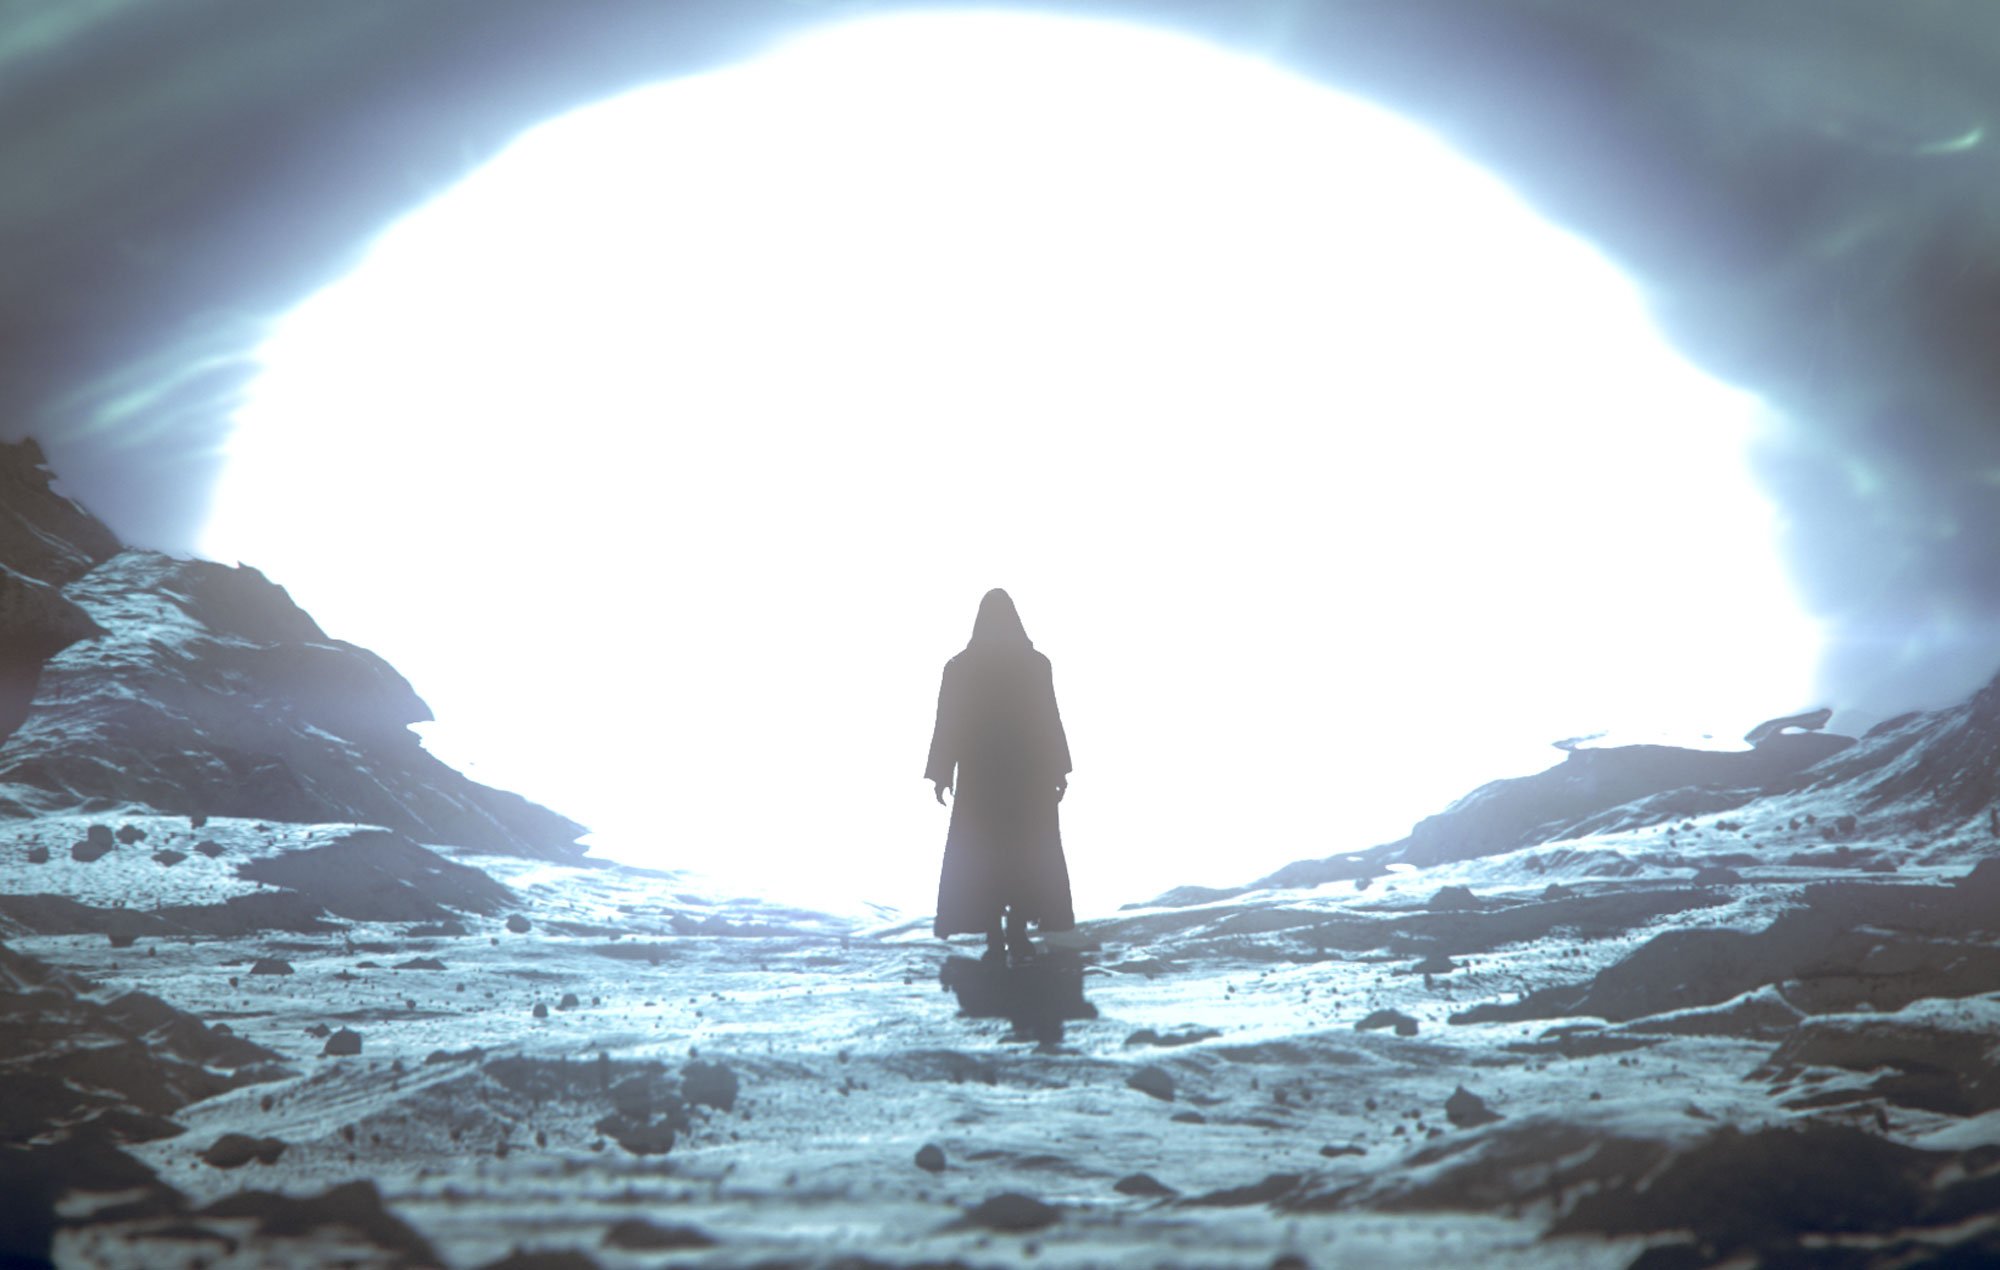 Endwalker' expansion for 'Final Fantasy XIV' takes players to the moon